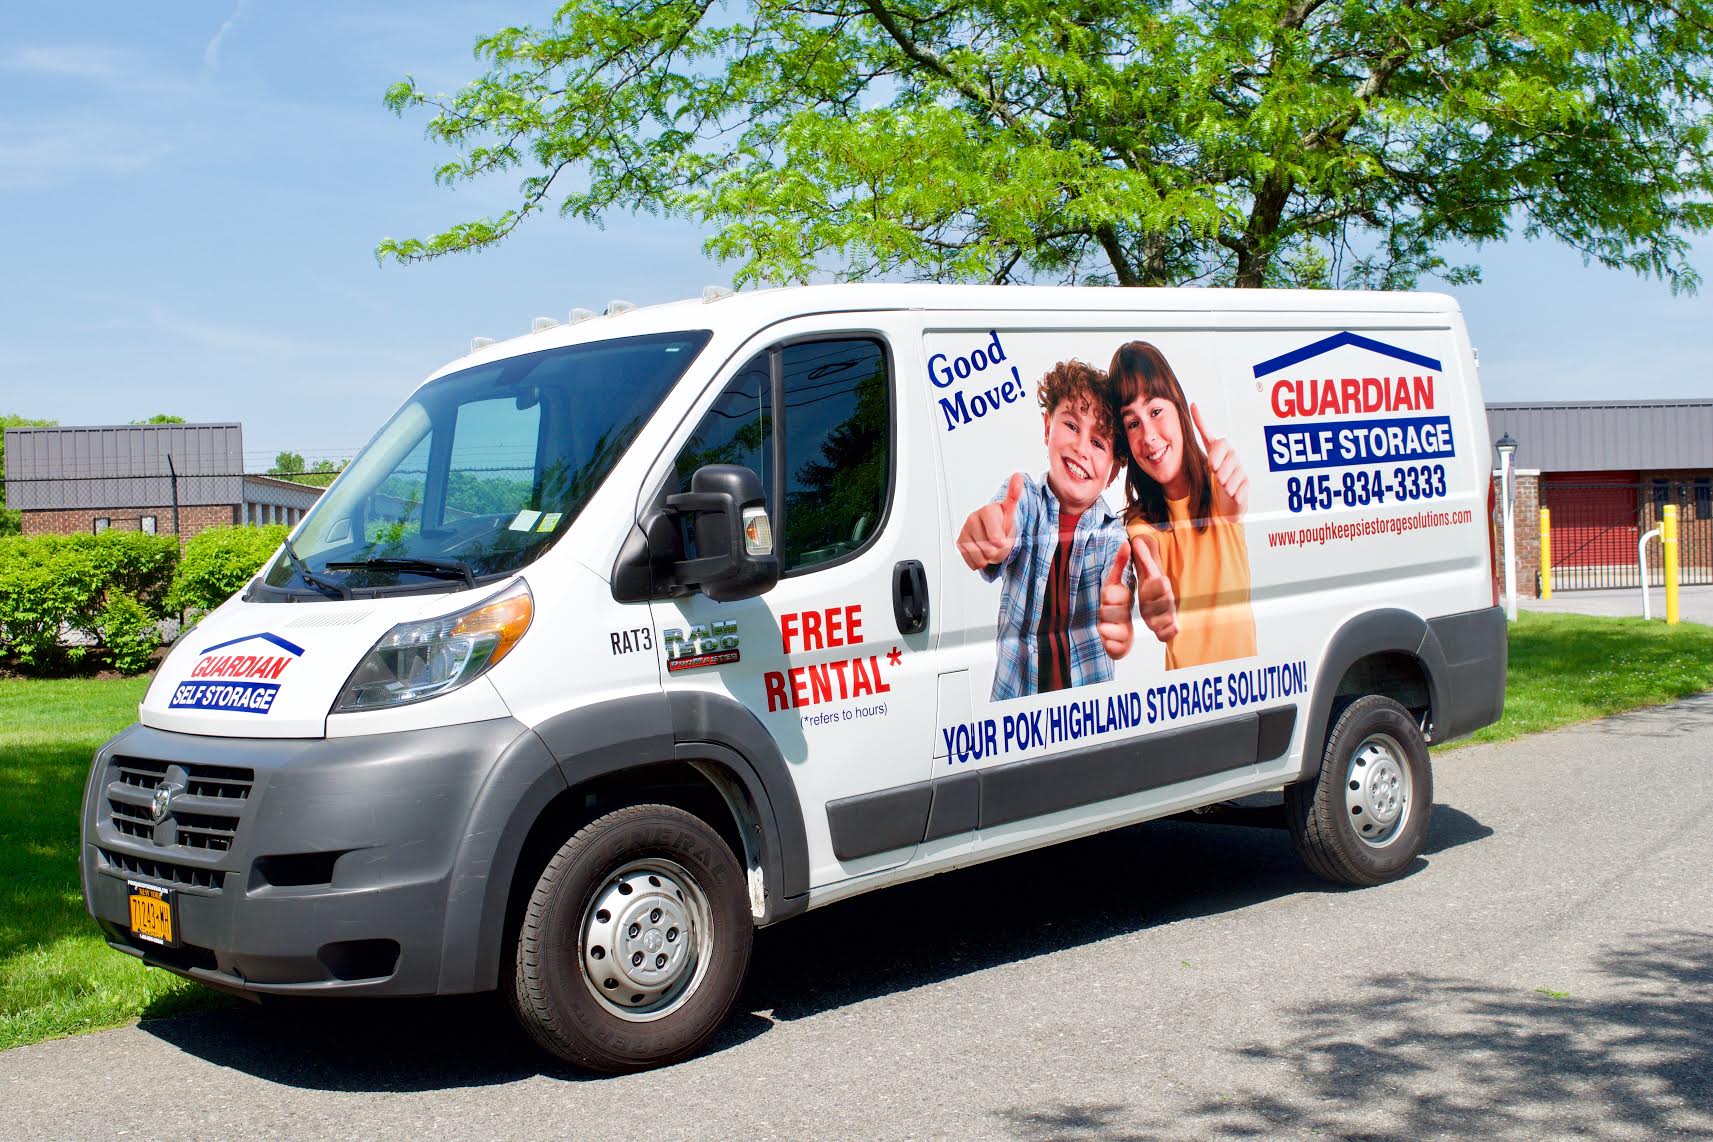 Free rental truck - The van 10'x6'x5.5' front side view